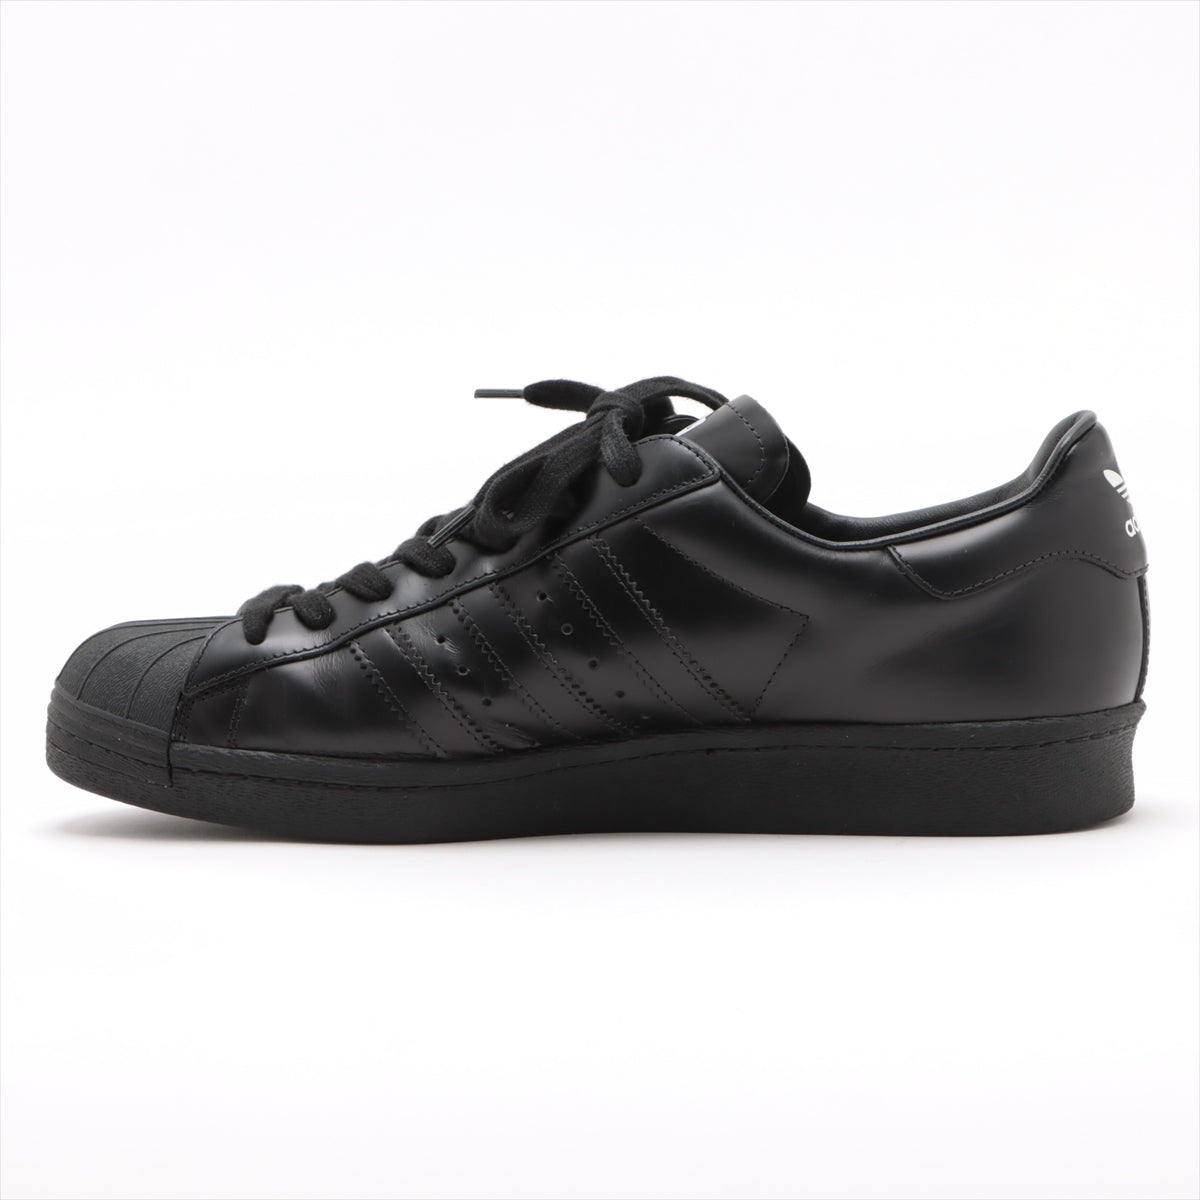 Prada x Adidas superstars Leather Sneakers 28.5㎝ Men's Black FW6679 There is a box